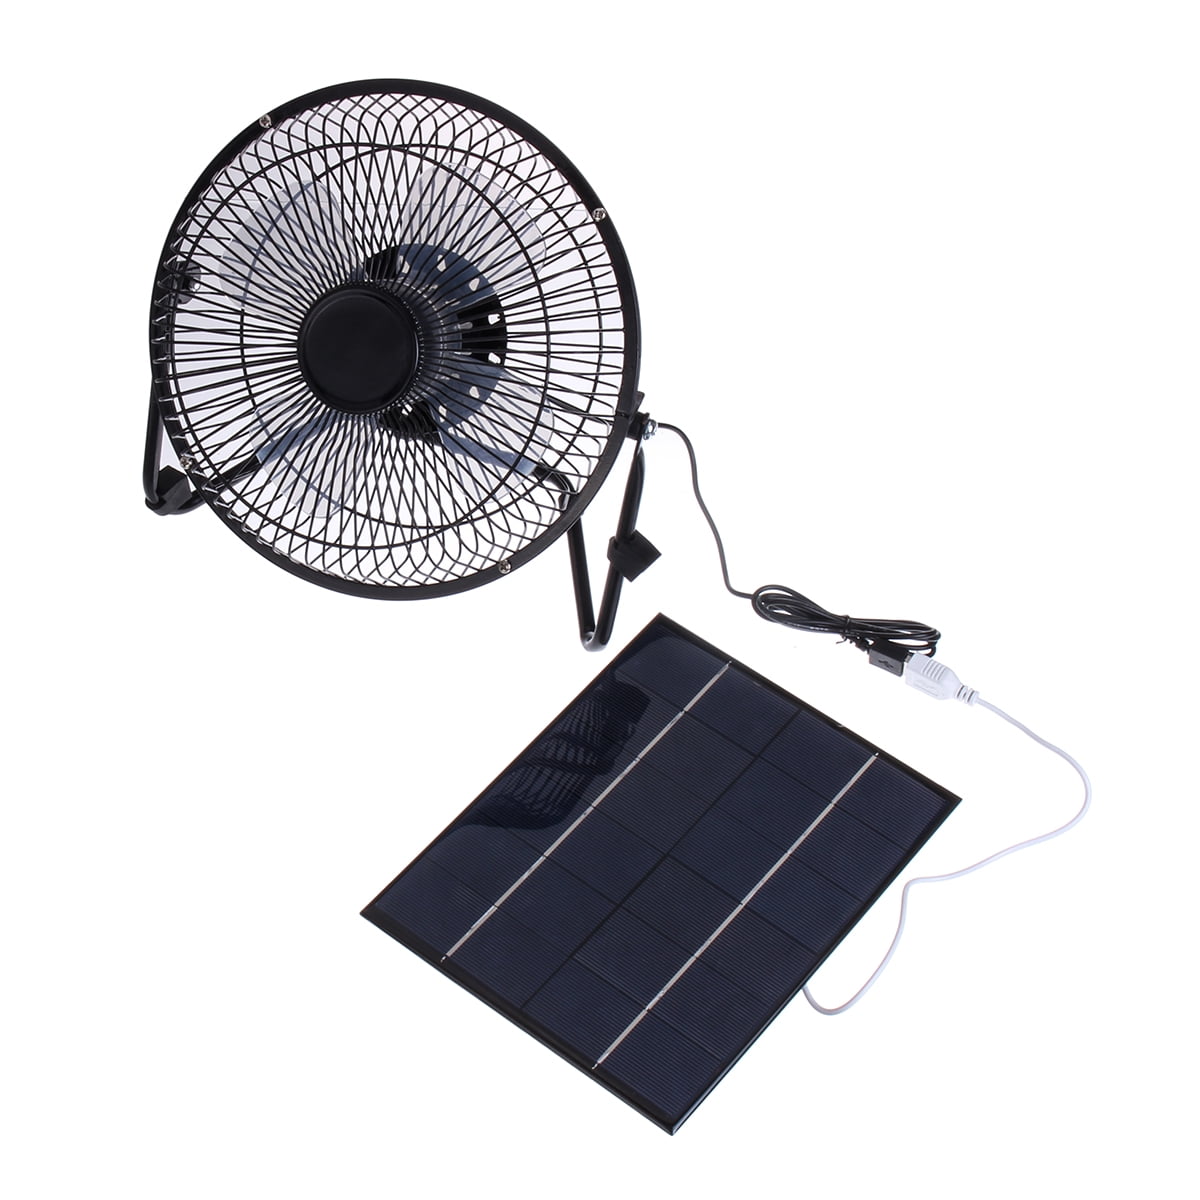 4/6/8 Inch USB Solar Panel Iron Fan Powered For Outdoor Home Cooling Ventilation 